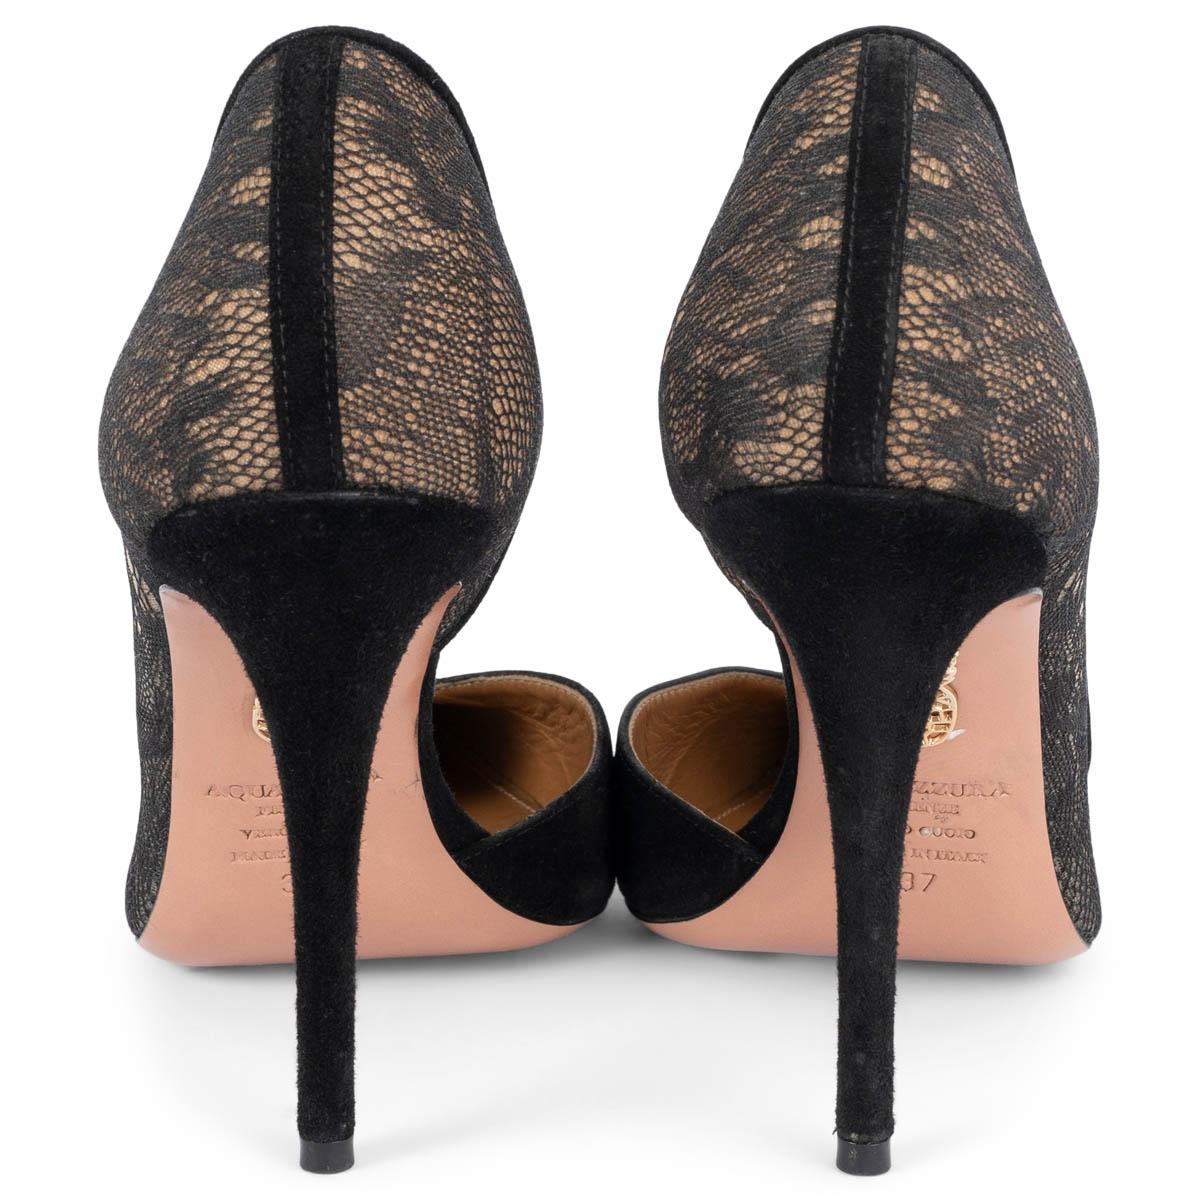 AQUAZZURA black lace & suede POINTED TOE CUT-OUT Pumps Shoes 37 In Excellent Condition For Sale In Zürich, CH